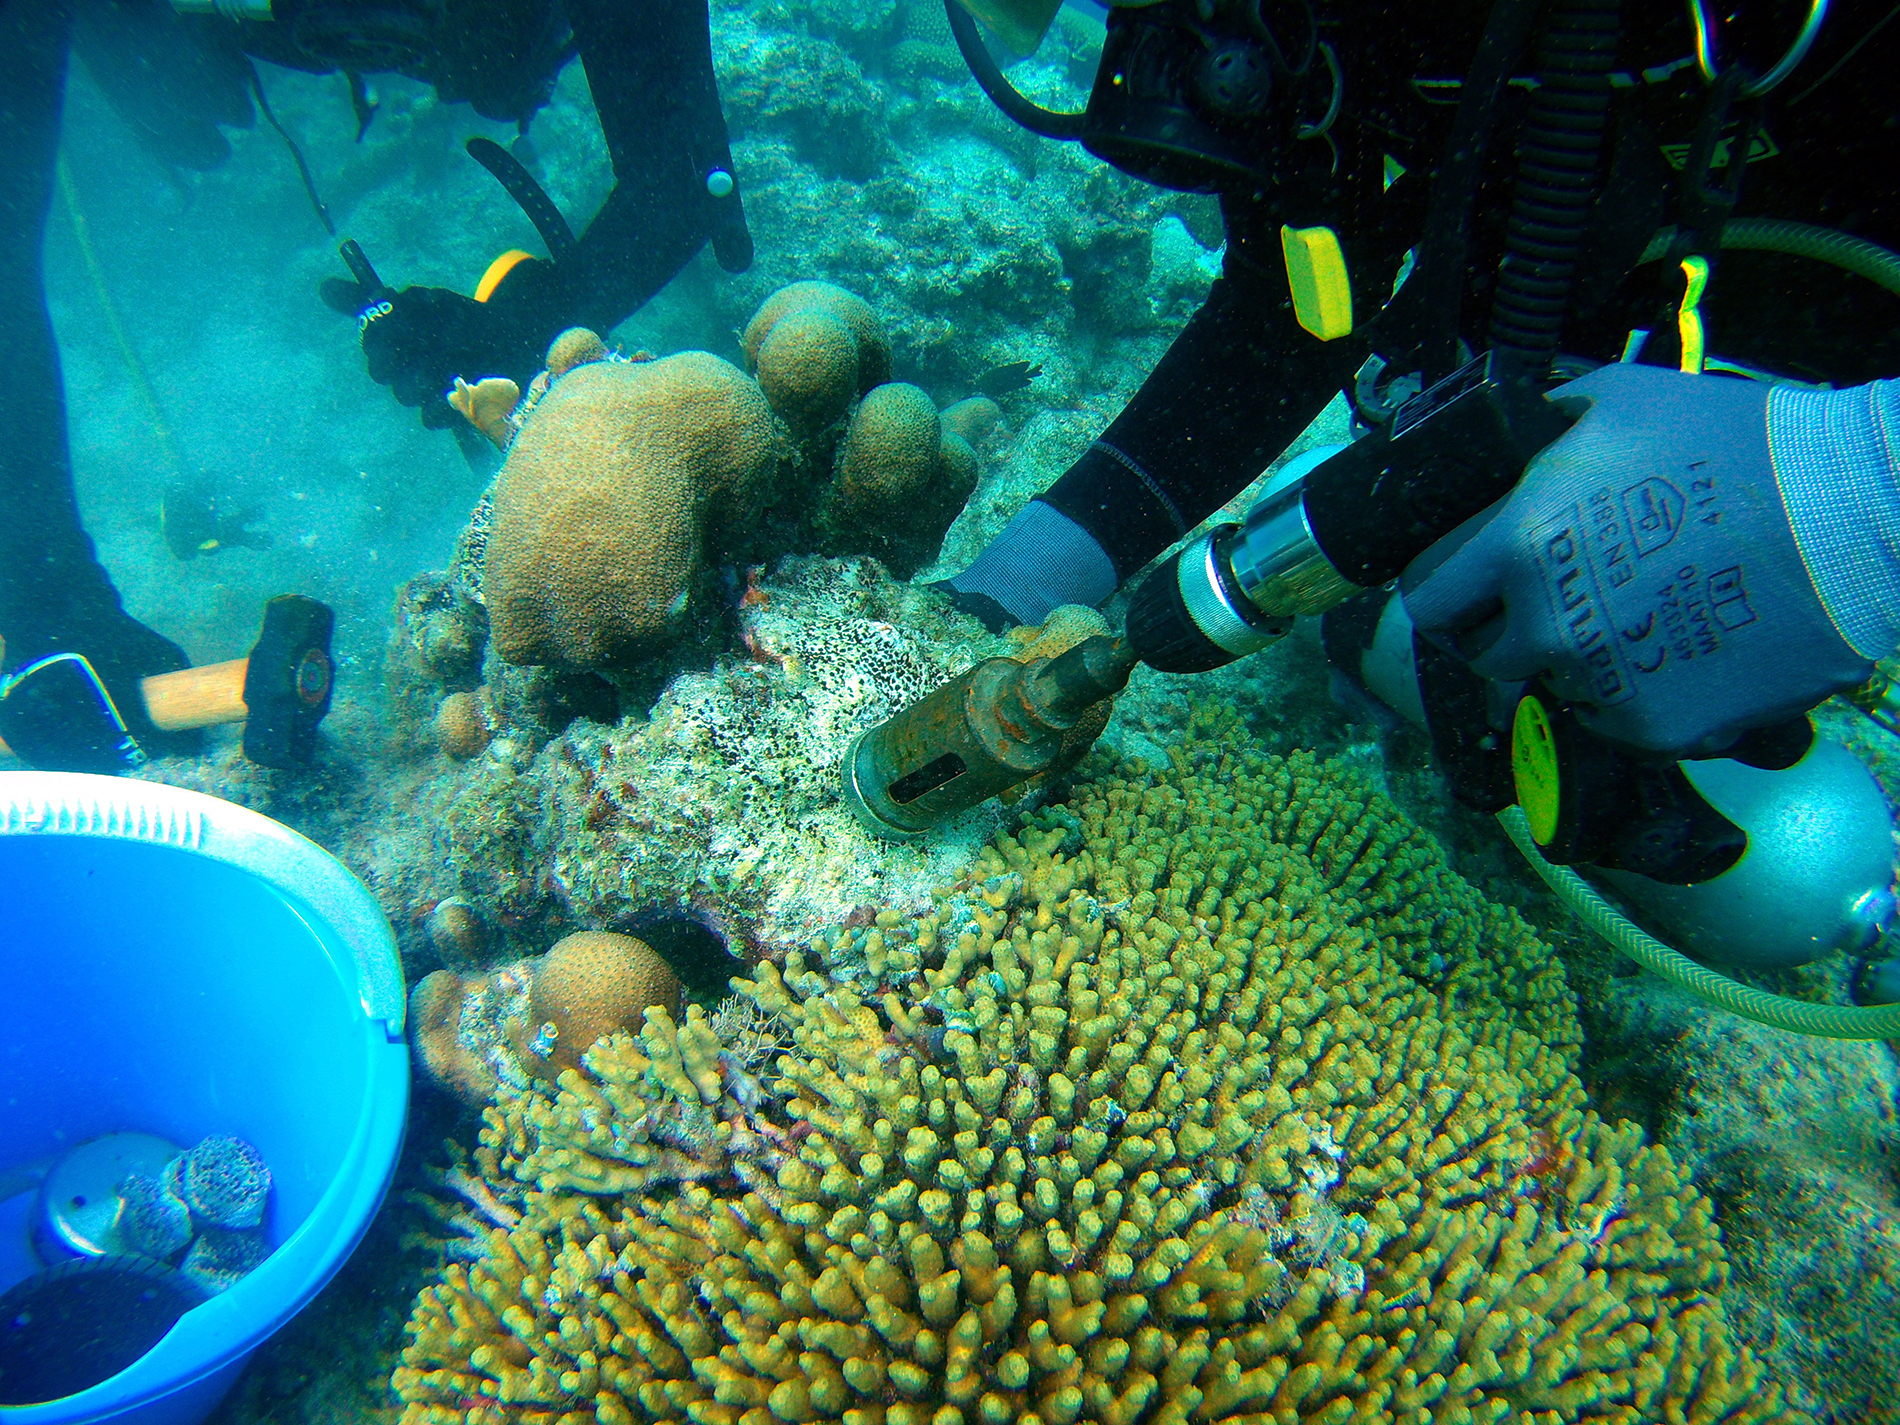 Scientists collecting bioeroding sponges using a pneumatic drill. Photo: Alice Webb.